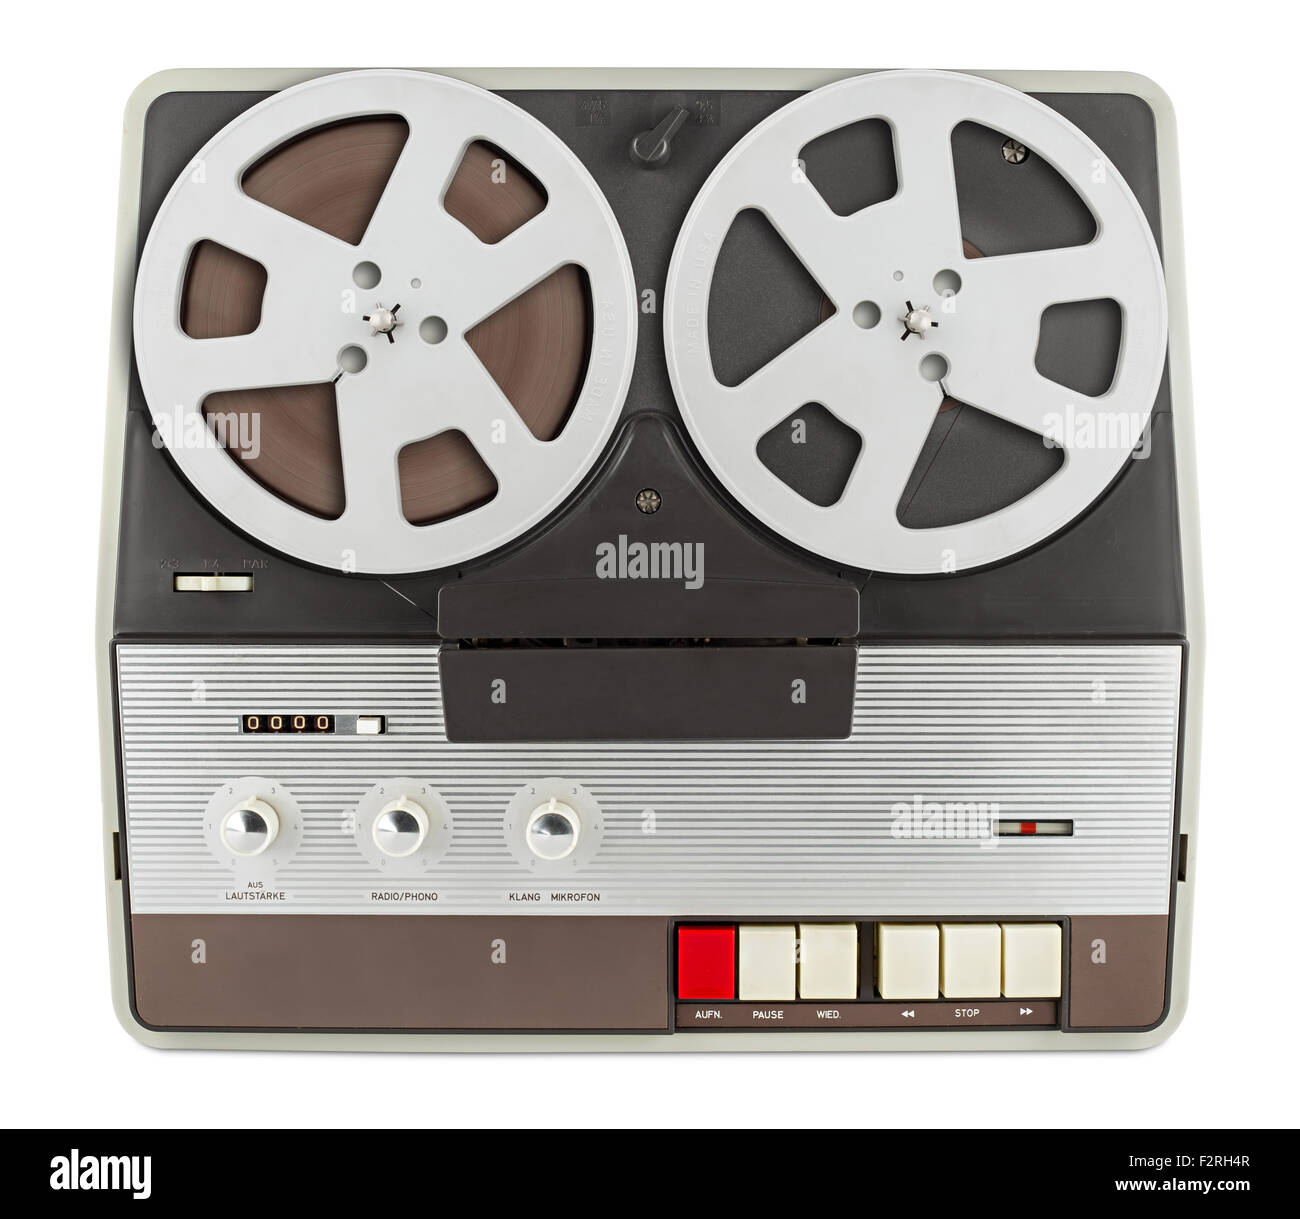 Vintage reel tape recorder icon with retro style for nostalgia design. Reel  to reel audio tape recording. Vector illustration of retro tape recorder  with flat style. Graphic resource of old technology 21021453